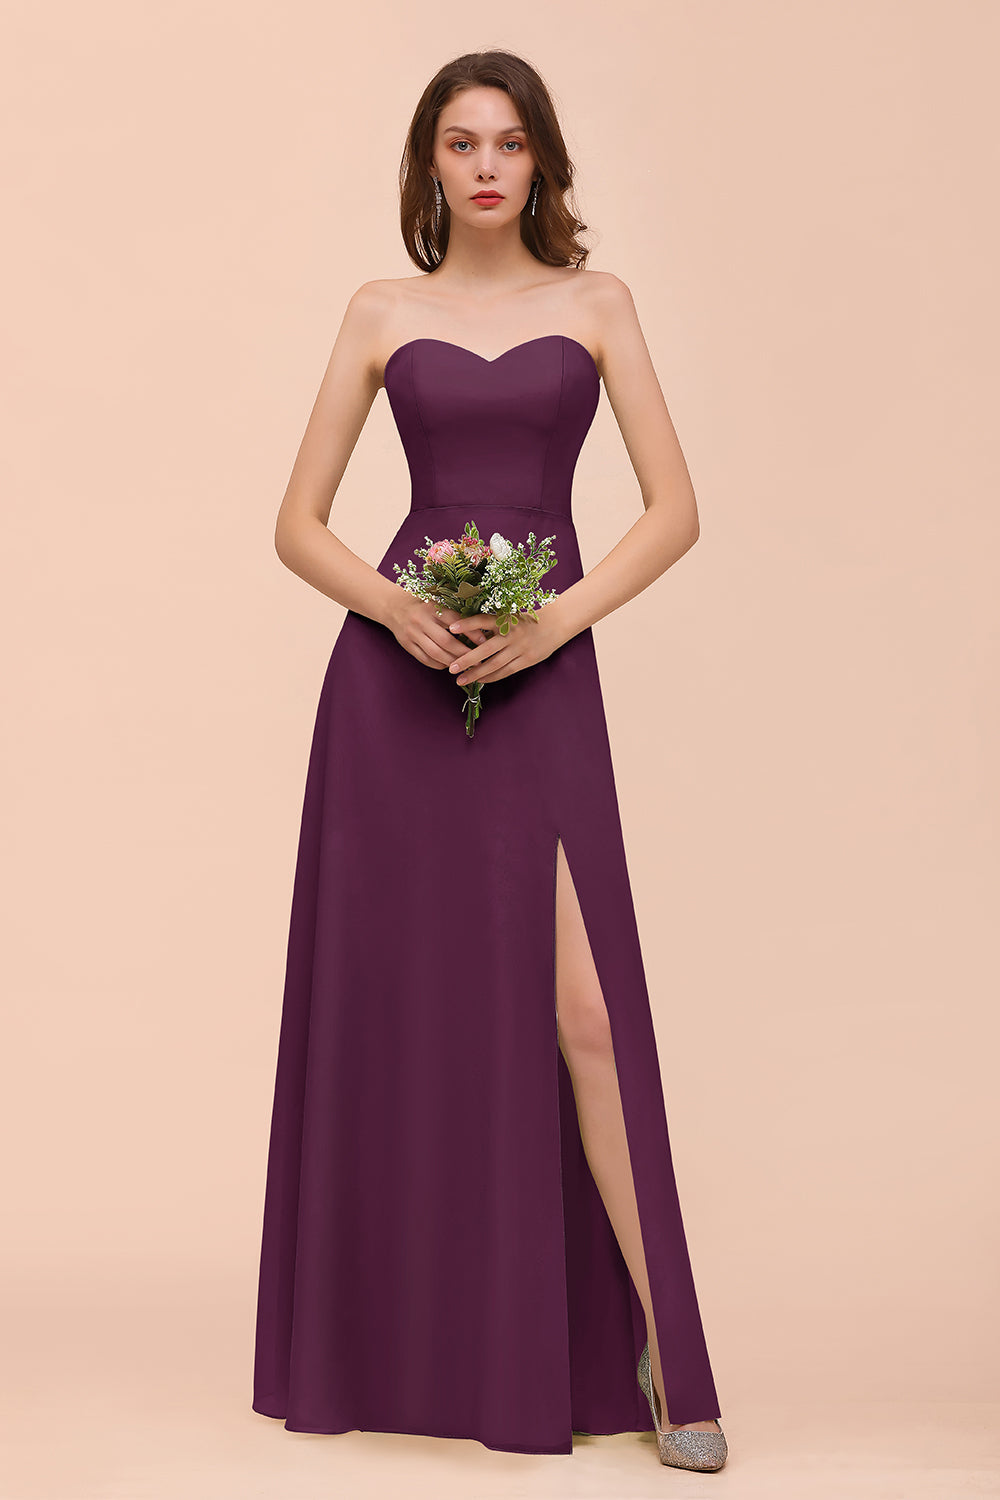 Affordable Strapless Front Slit Long Dusty Sage Bridesmaid Dress